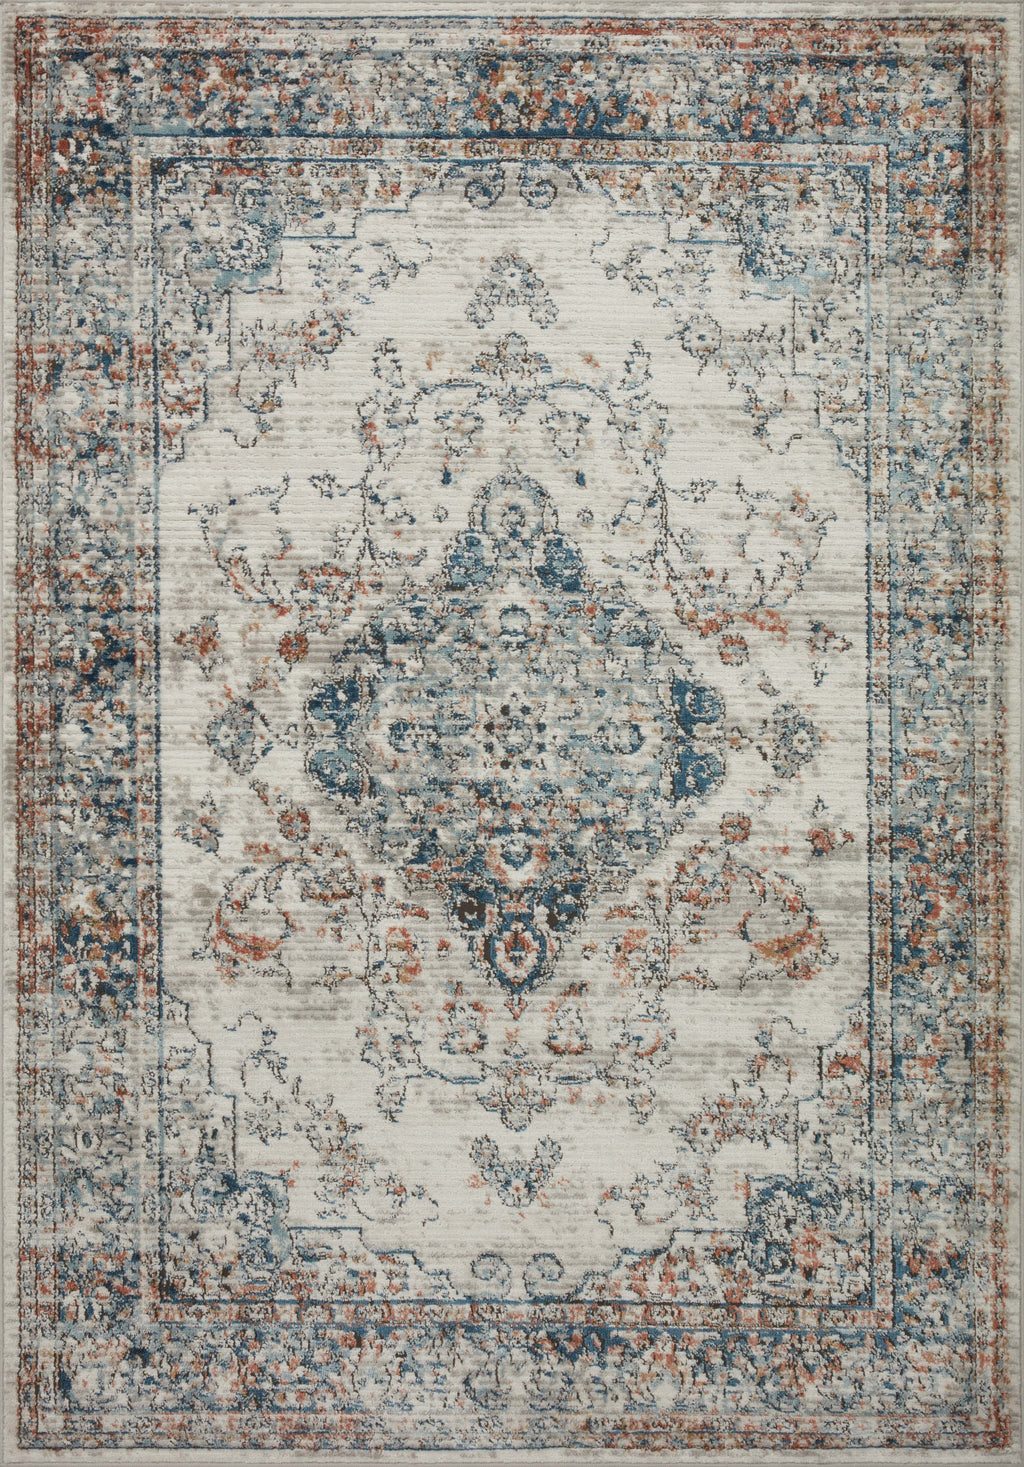 BIANCA Collection Rug  in  IVORY / OCEAN Ivory Accent Power-Loomed Polypropylene/Polyester